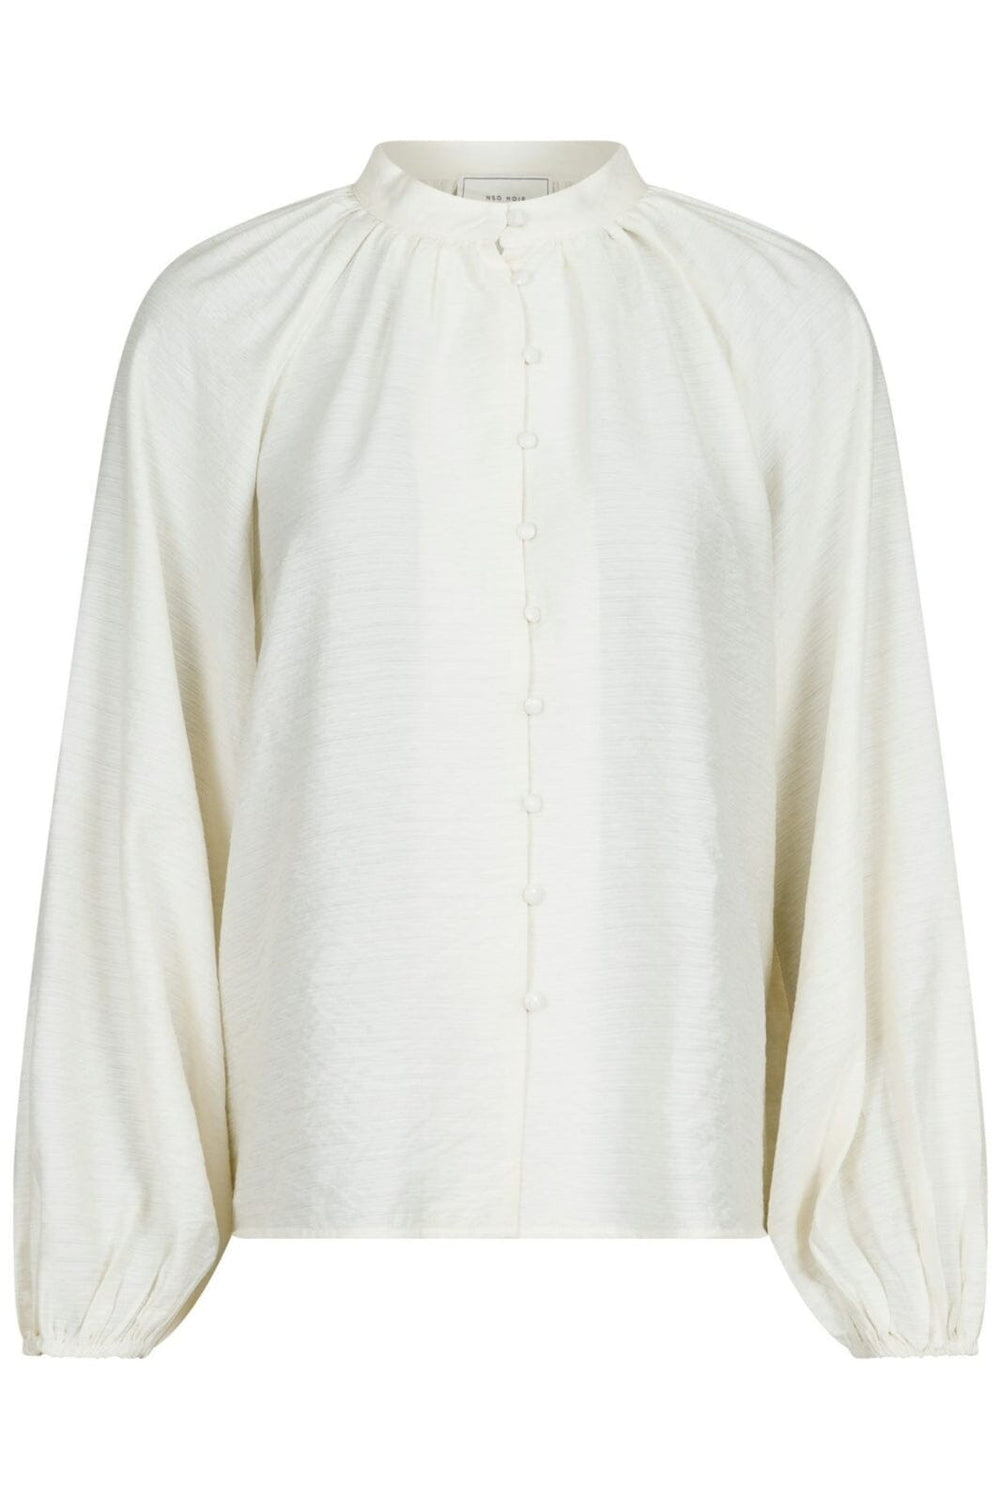 Neo Noir - Camille Solid Blouse - Off White Bluser 